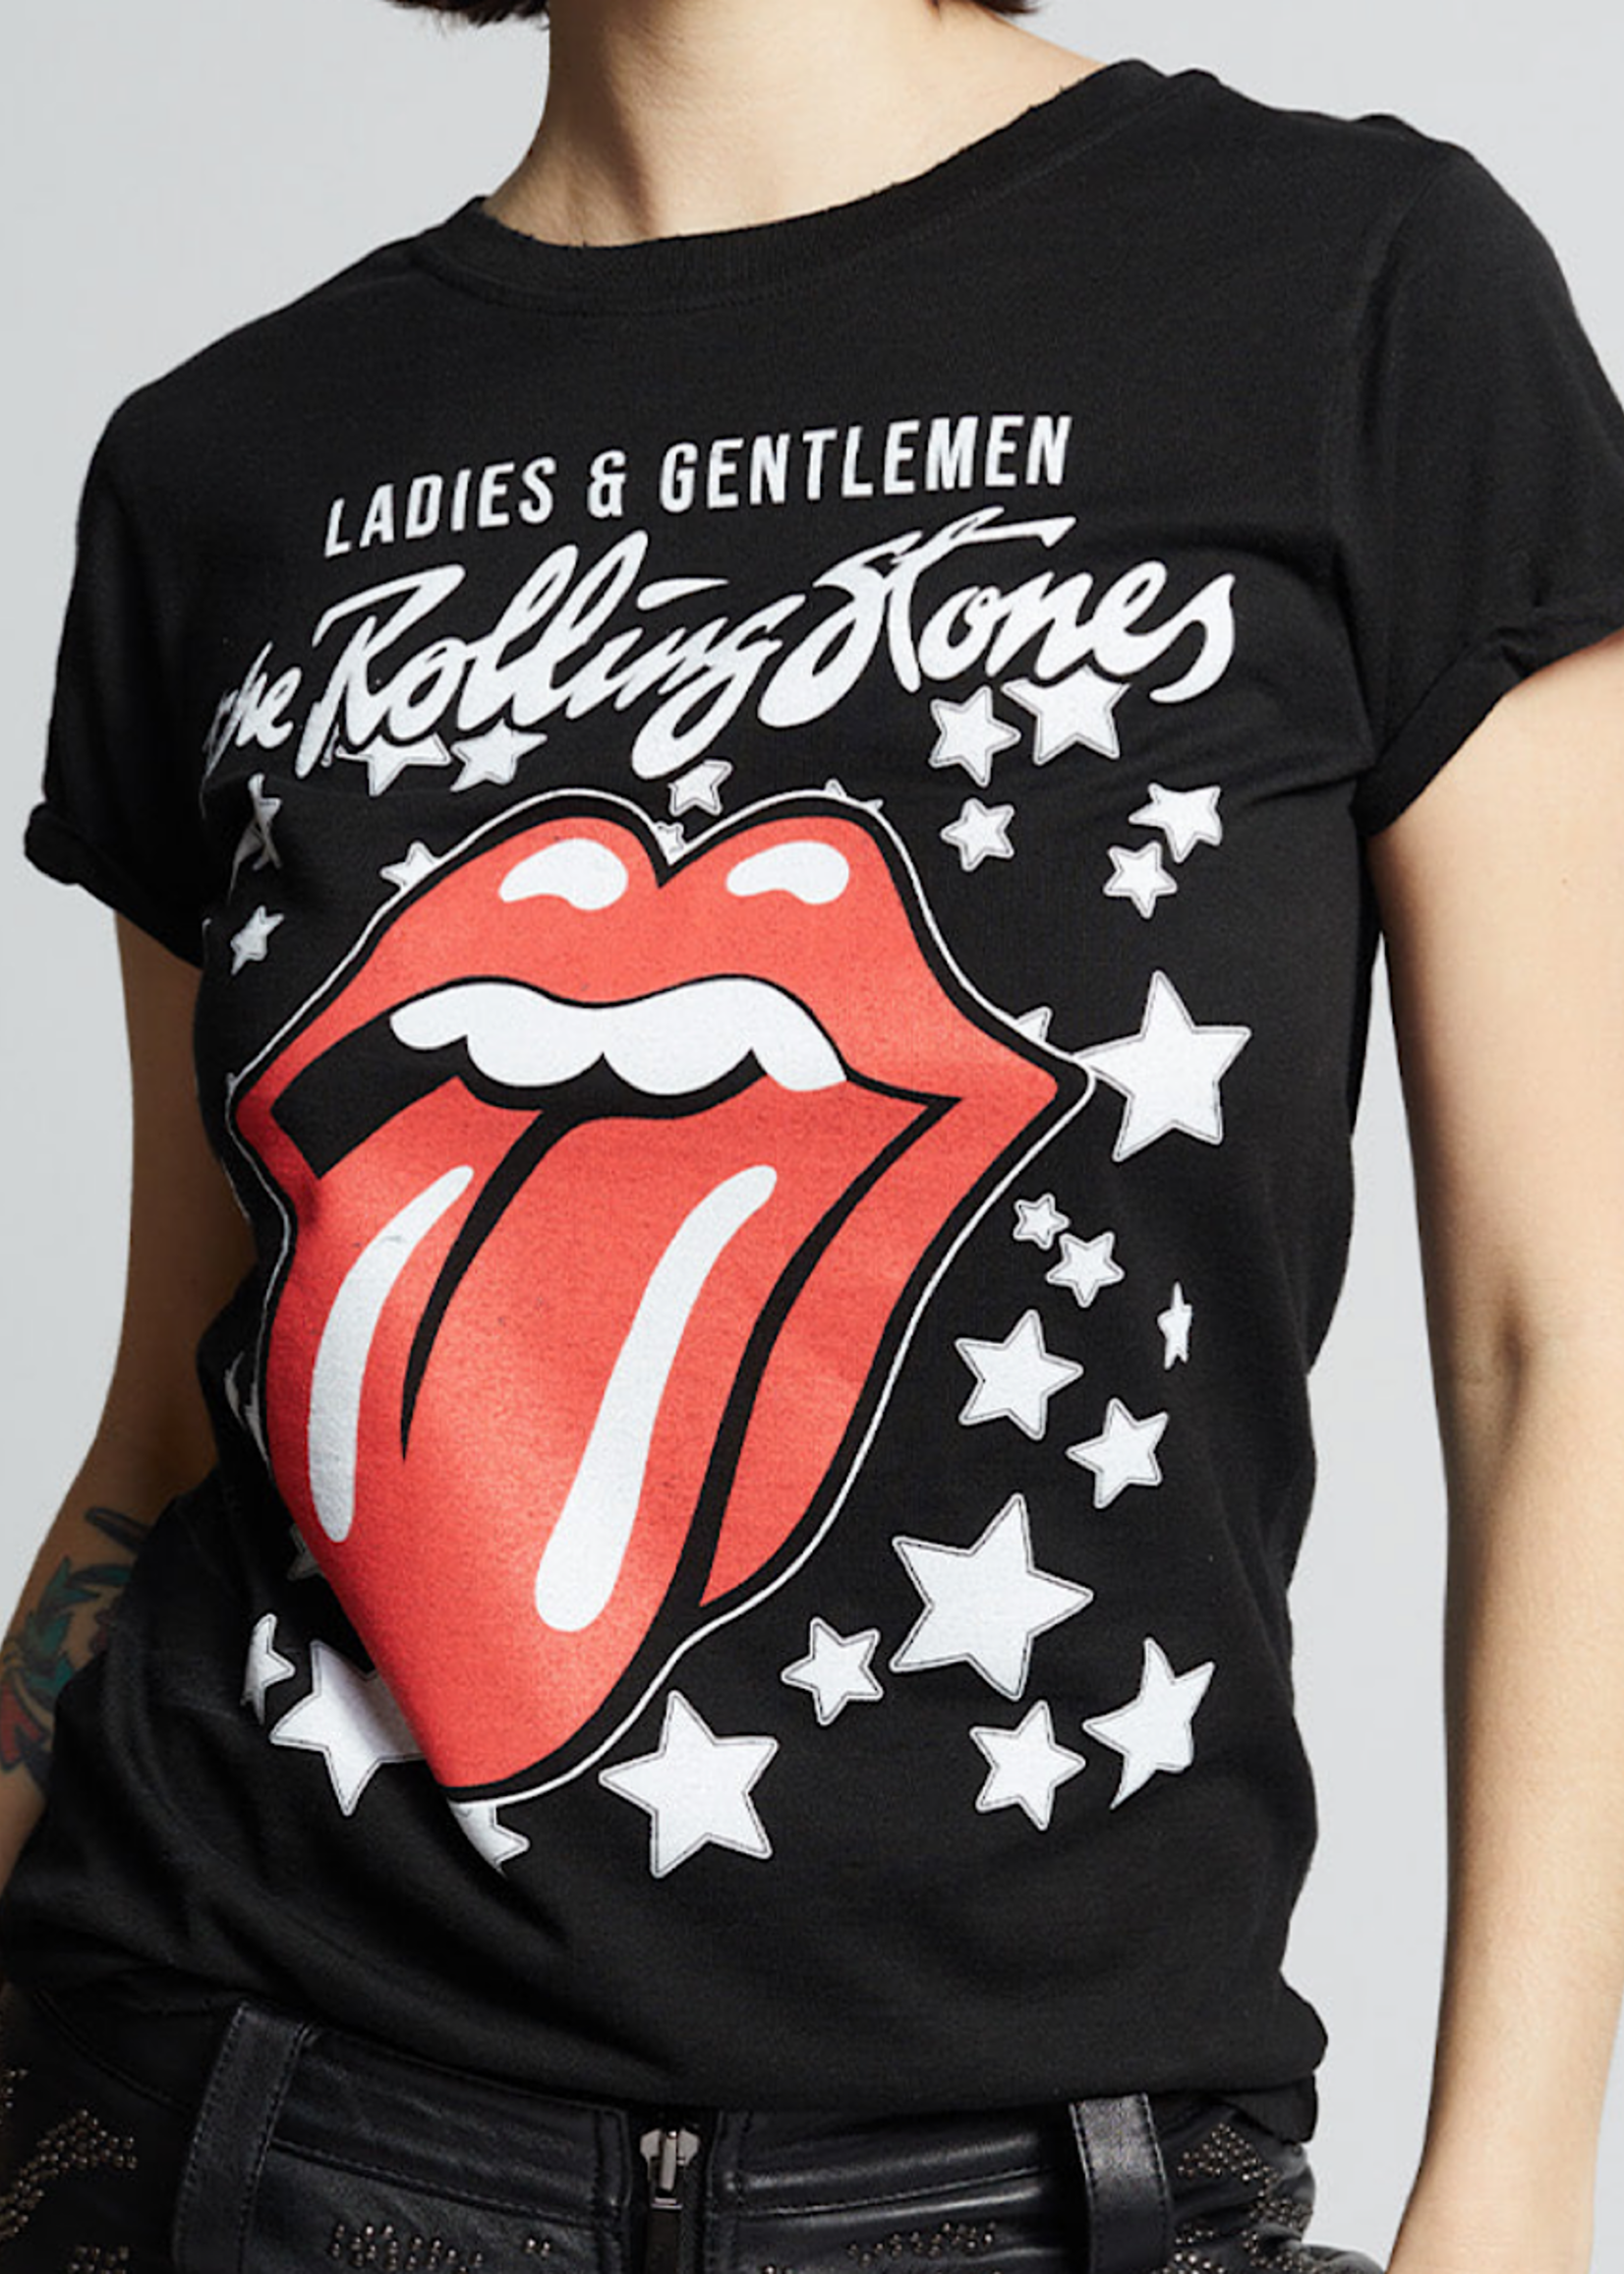 Recycled Karma The Rolling Stones Stars Black Top